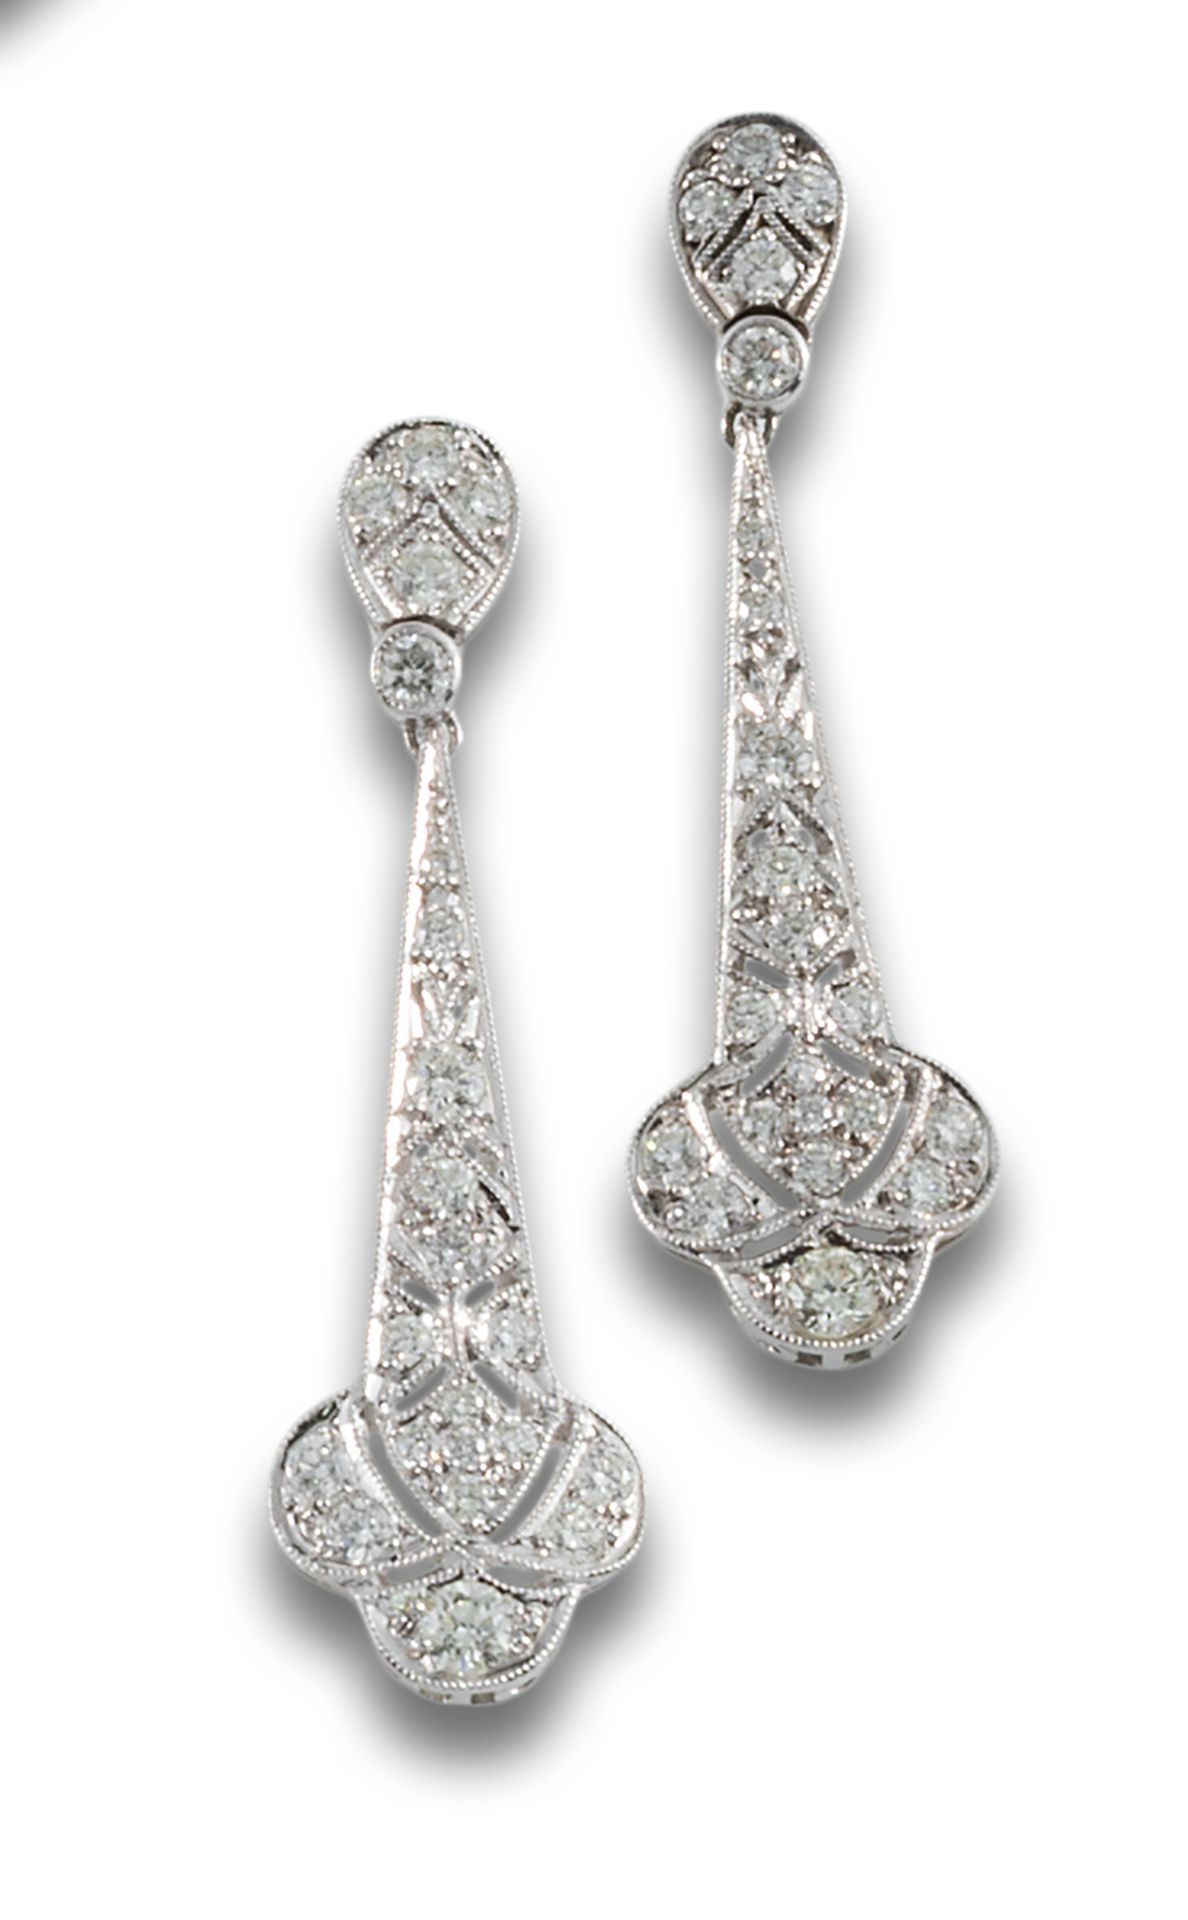 ART DECO STYLE LONG EARRINGS IN DIAMONDS AND PLATINUM Orecchini lunghi, stile an&hellip;